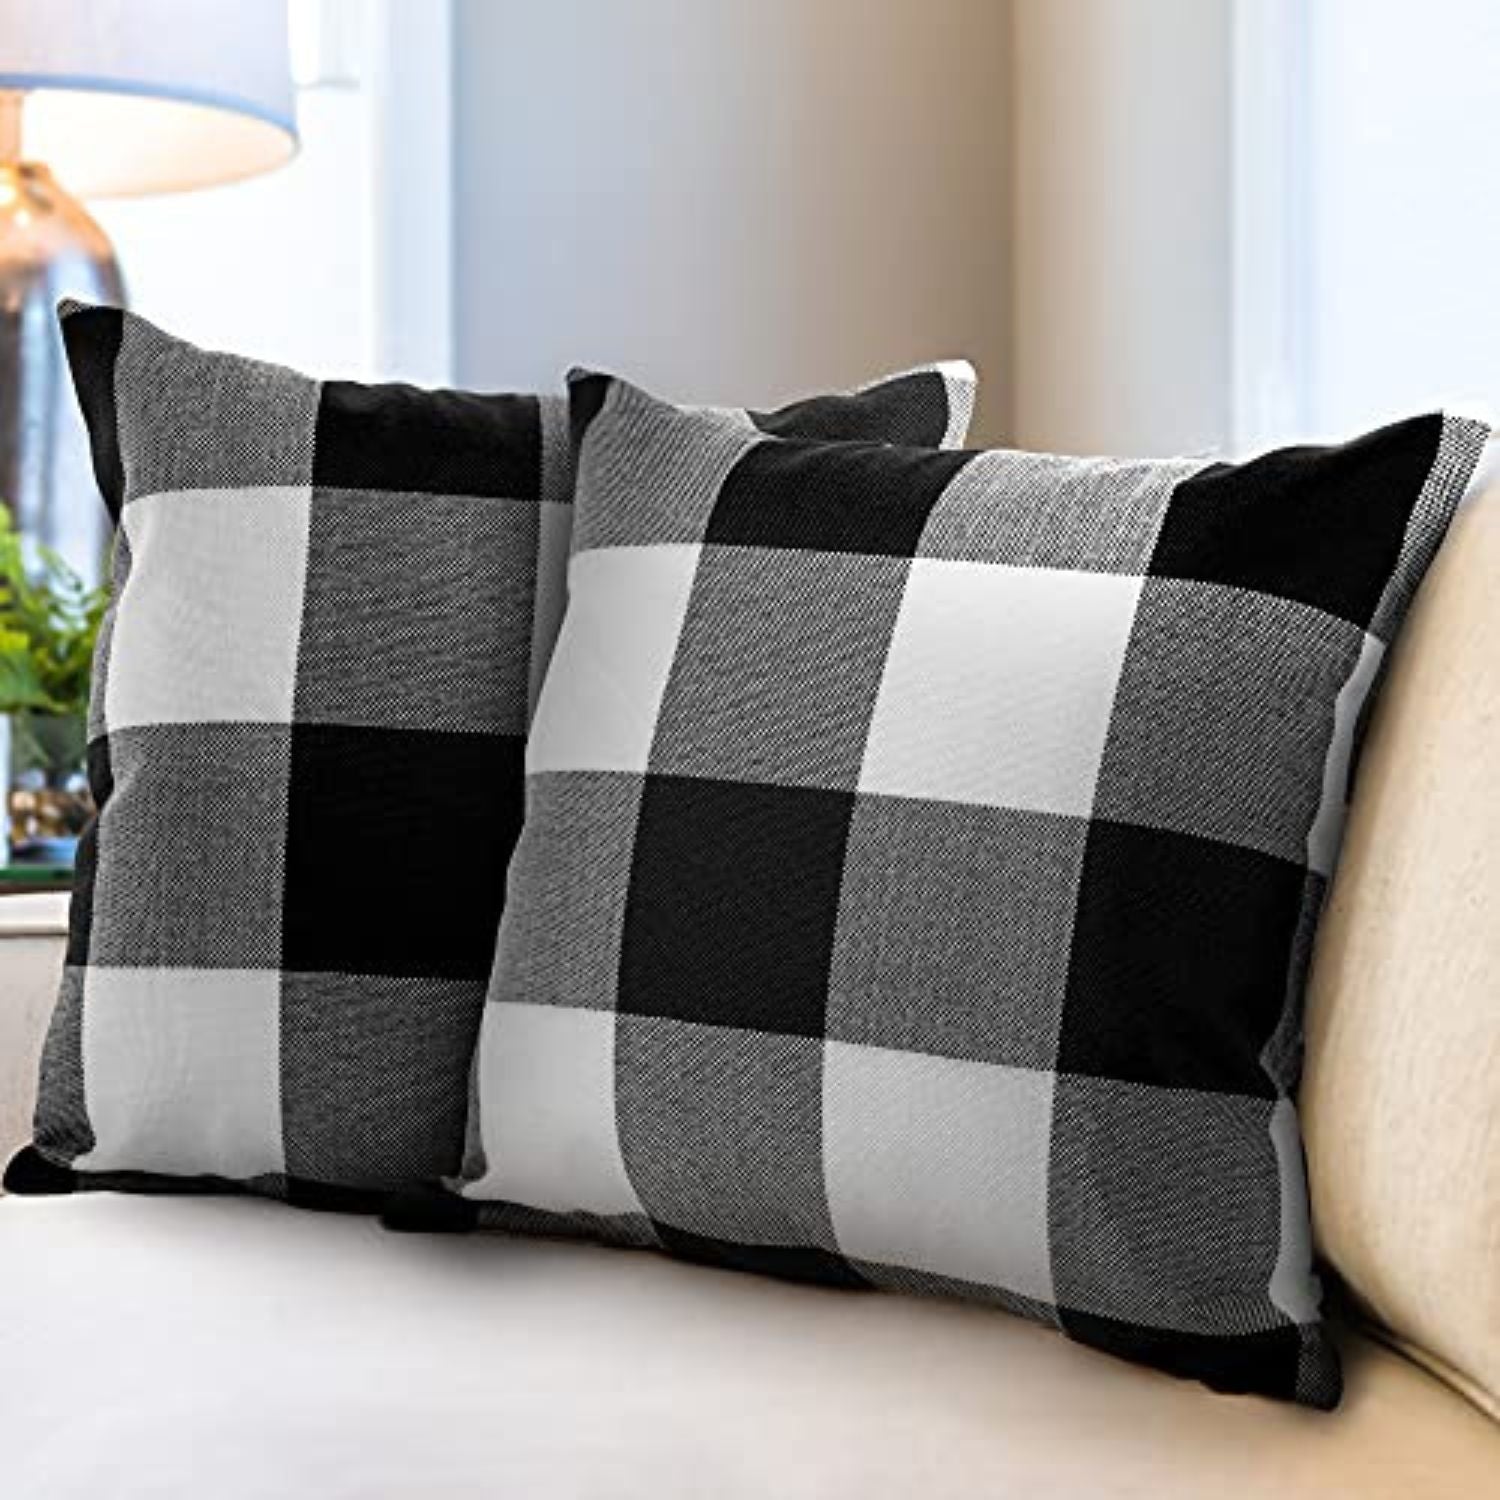 Zulay Kitchen Home Buffalo Plaid Throw Pillow Covers